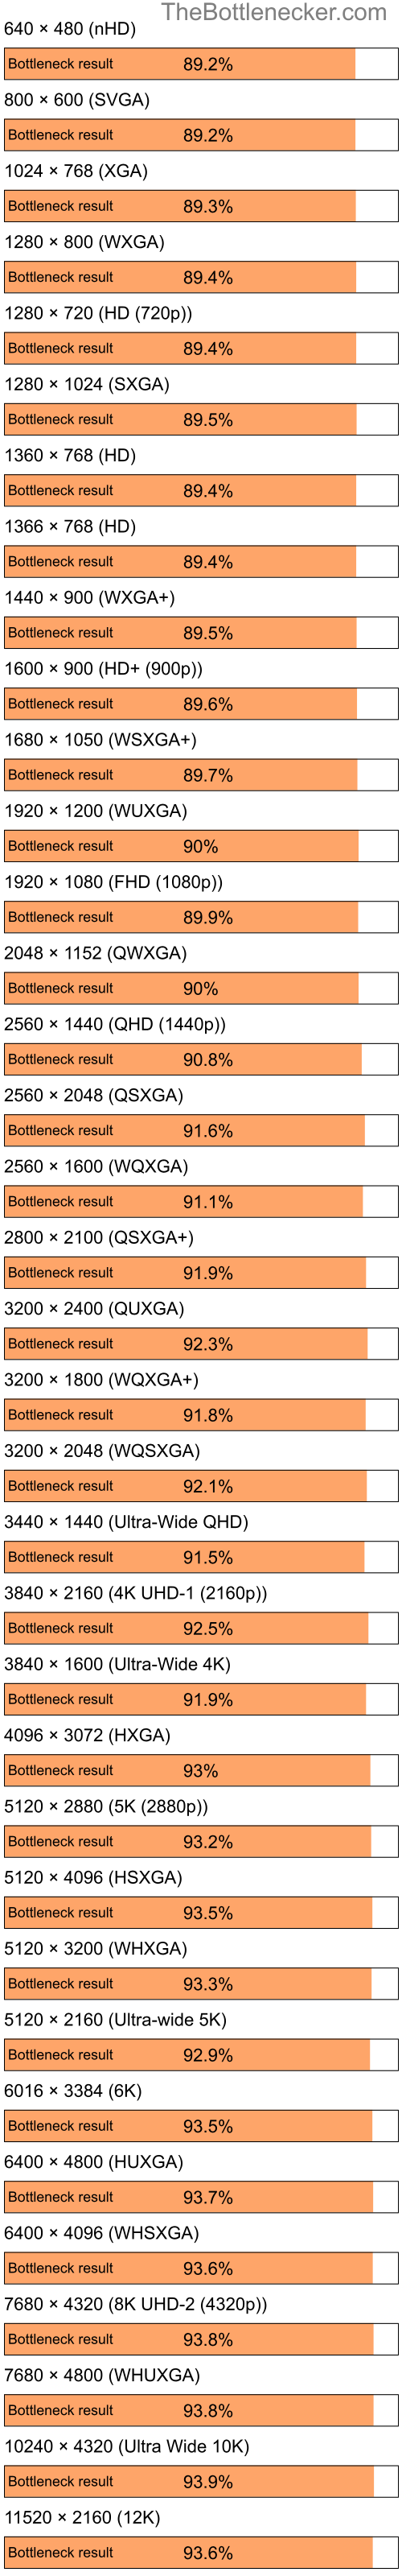 Bottleneck results by resolution for Intel Pentium 4 and NVIDIA GeForce4 MX 440 in General Tasks